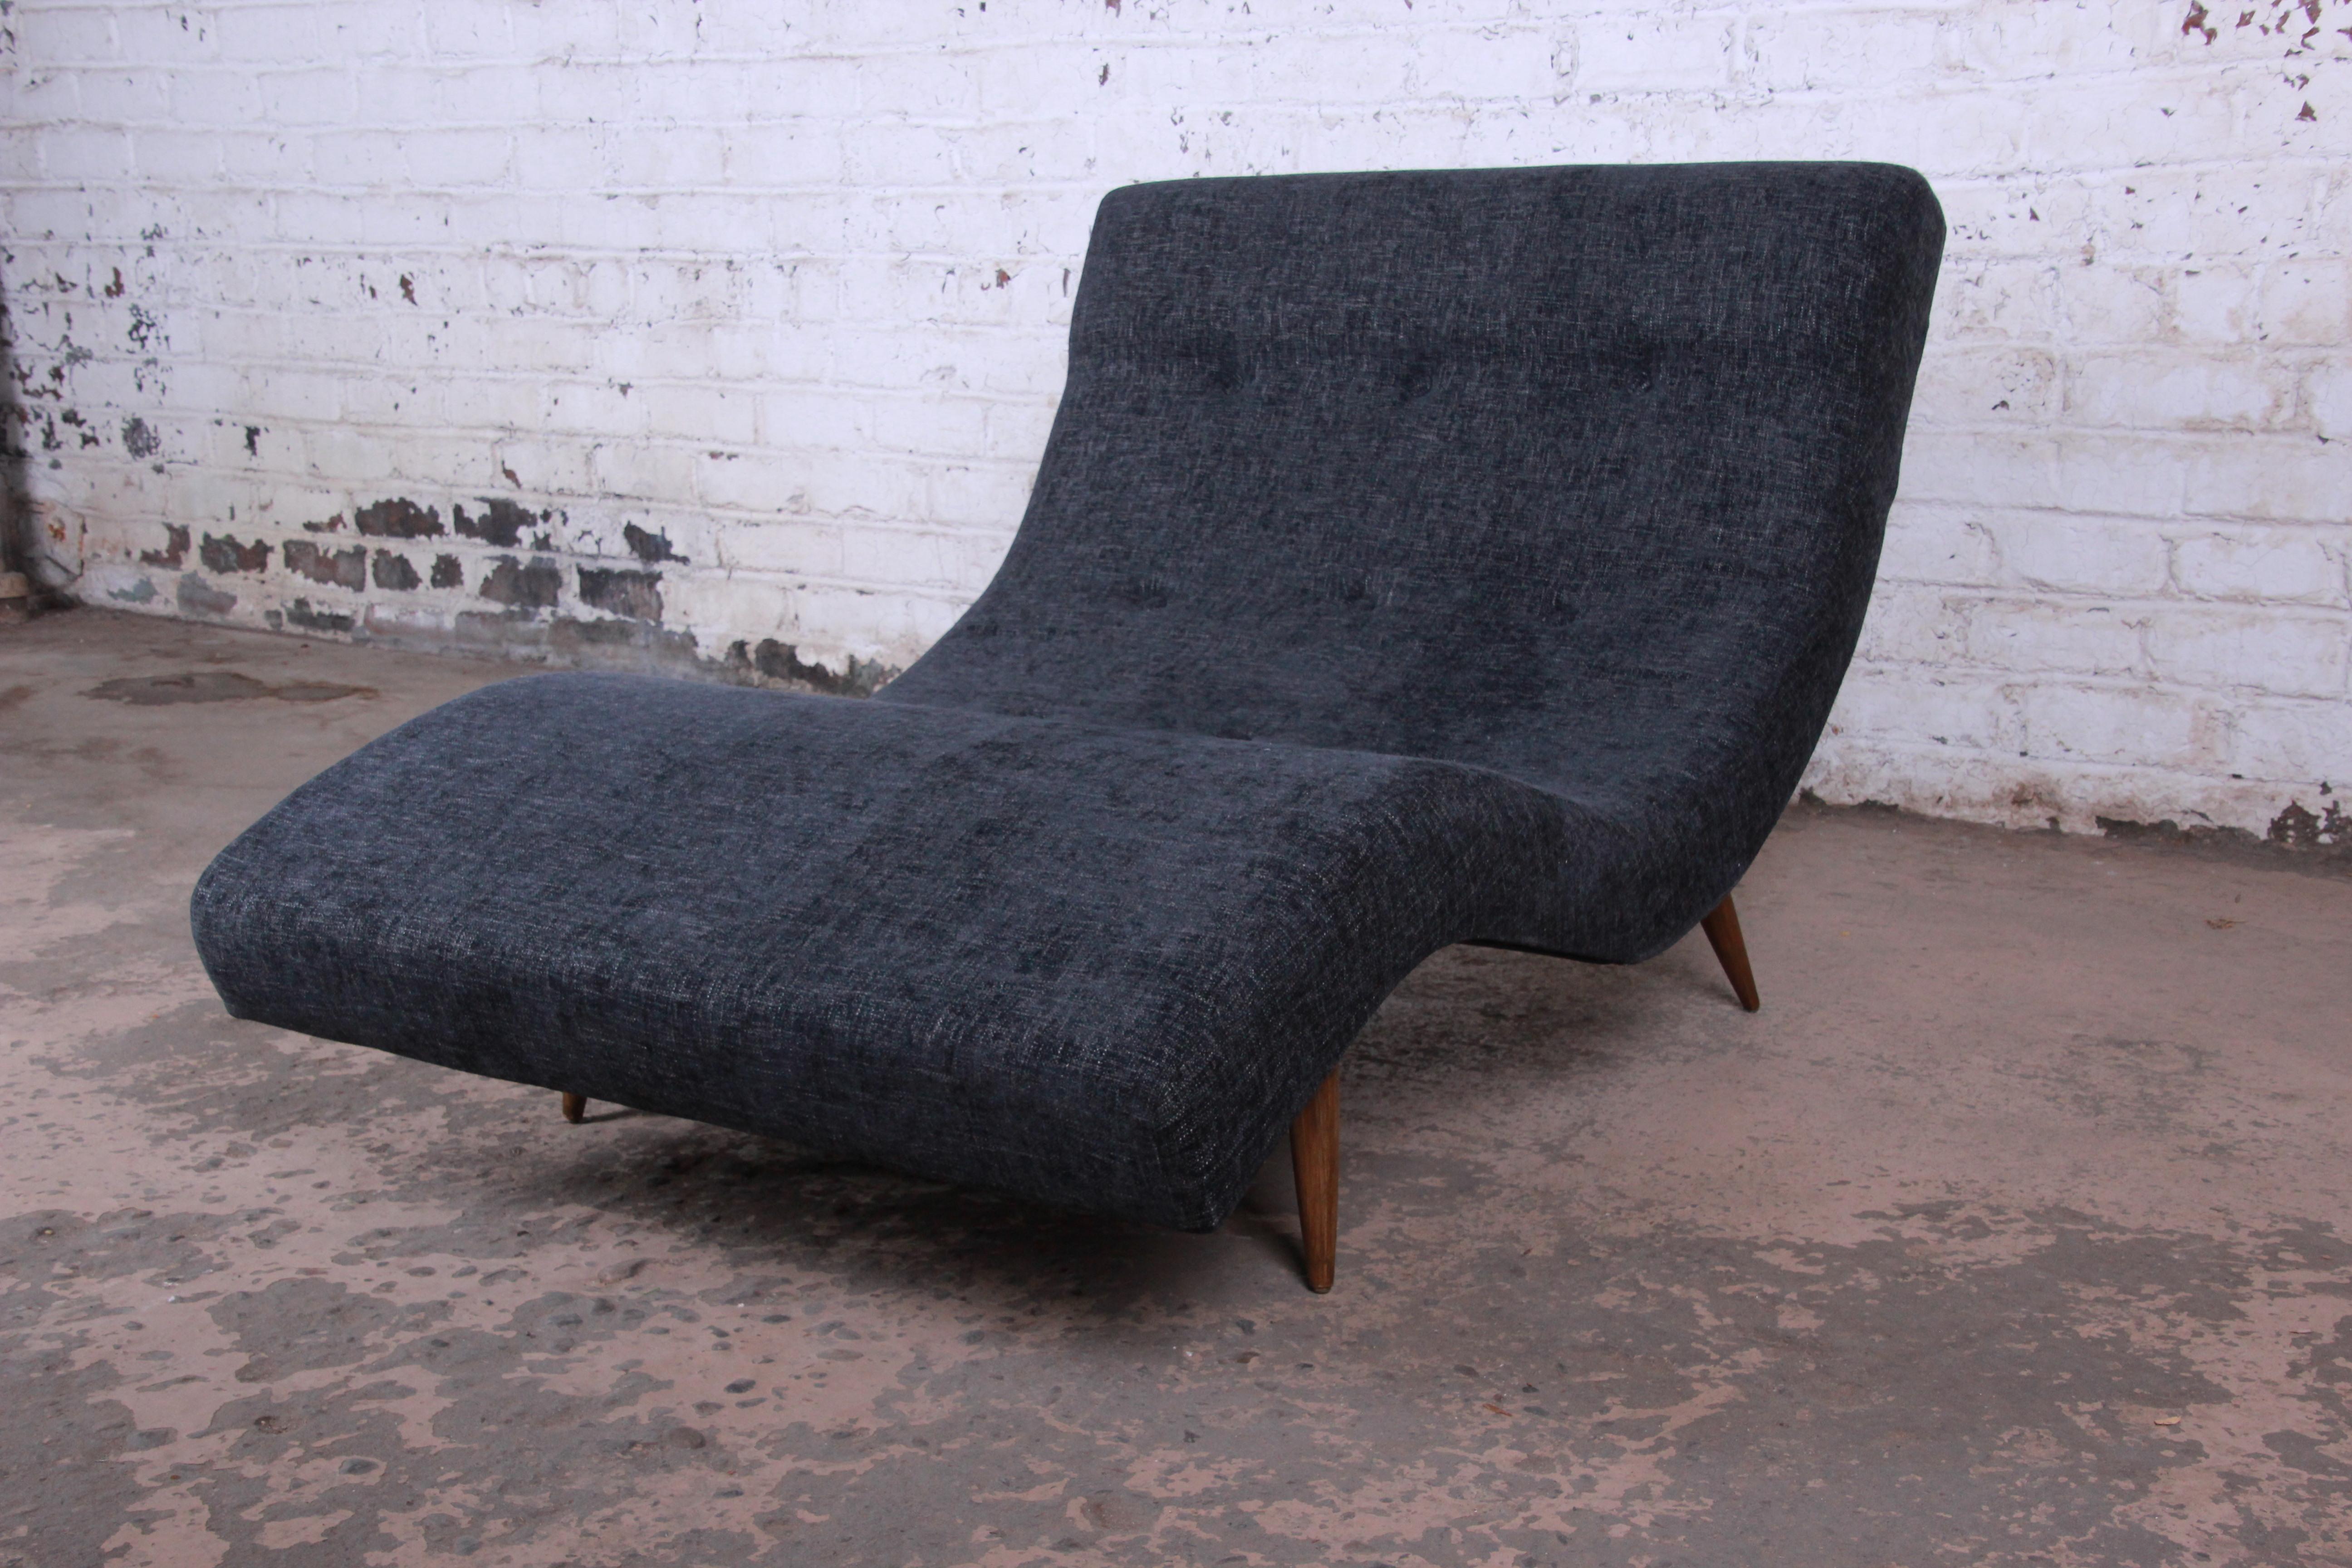 An exceptional Mid-Century Modern wave chaise lounge chair designed by Adrian Pearsall for Craft Associates. The chaise offers a unique blend of style and comfort. It features a dramatic wave design, with newly reupholstered charcoal fabric on